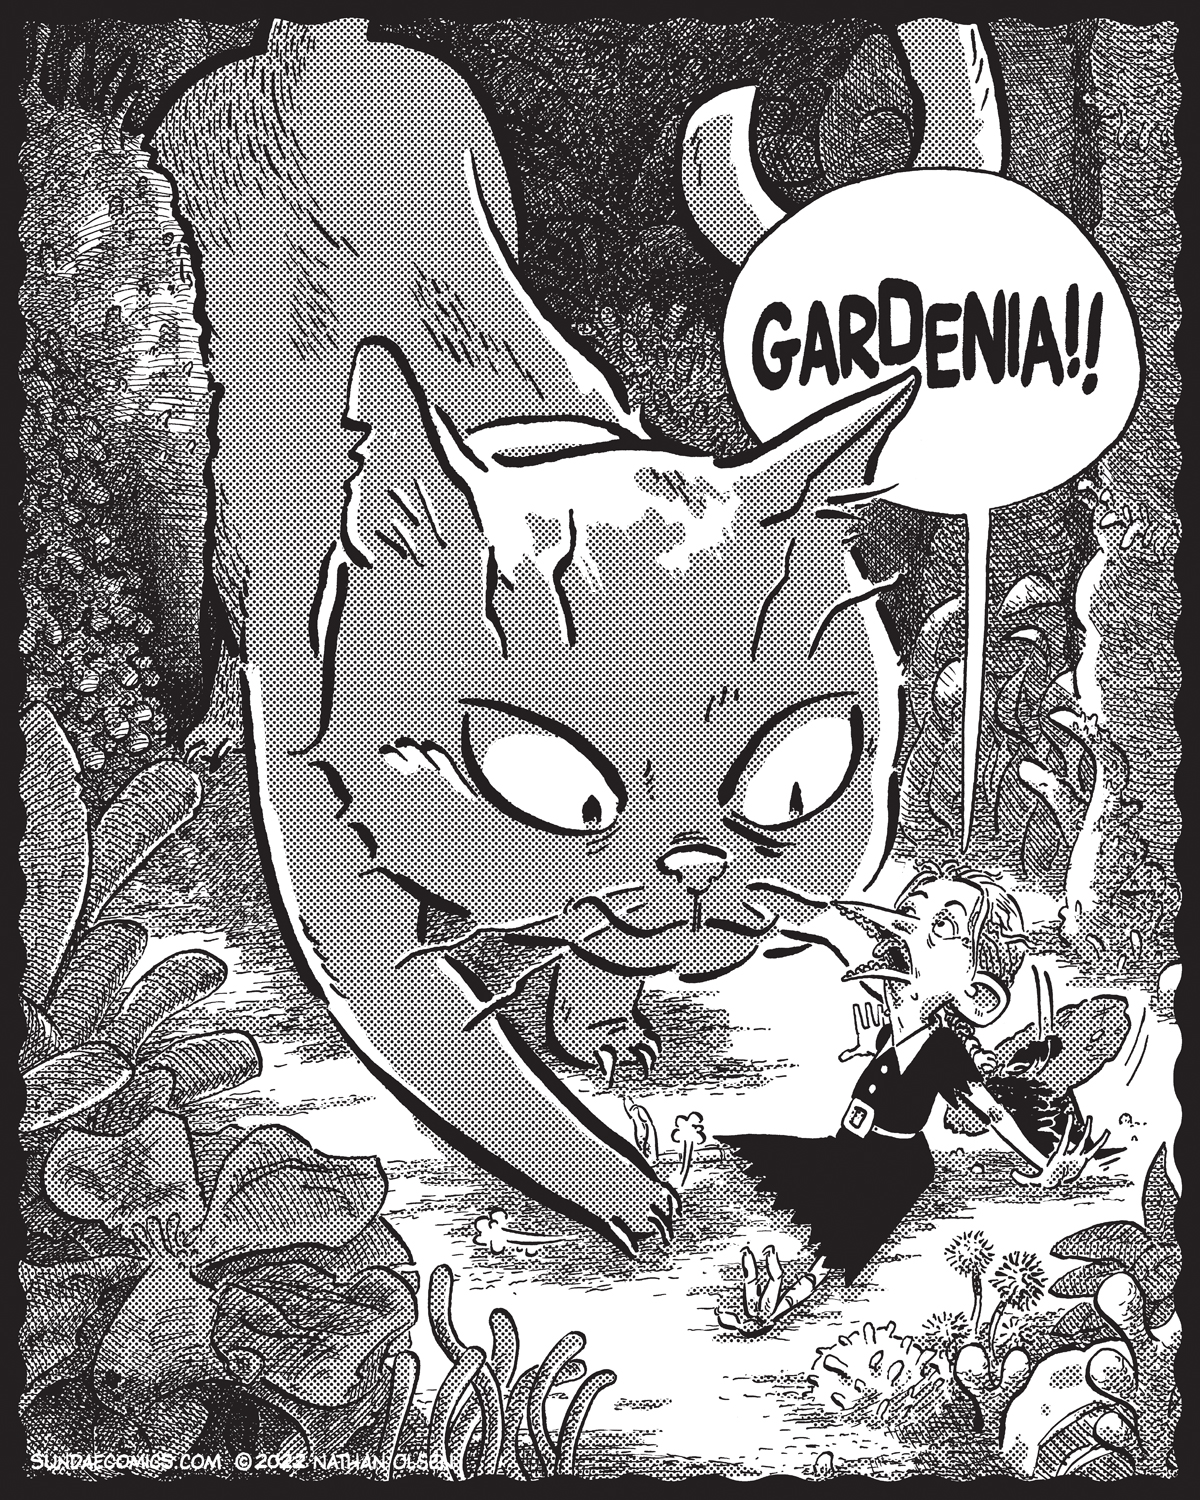 The strange beast that has been following Sunflower through the forest is revealed to be Gardenia, Iris's familiar.